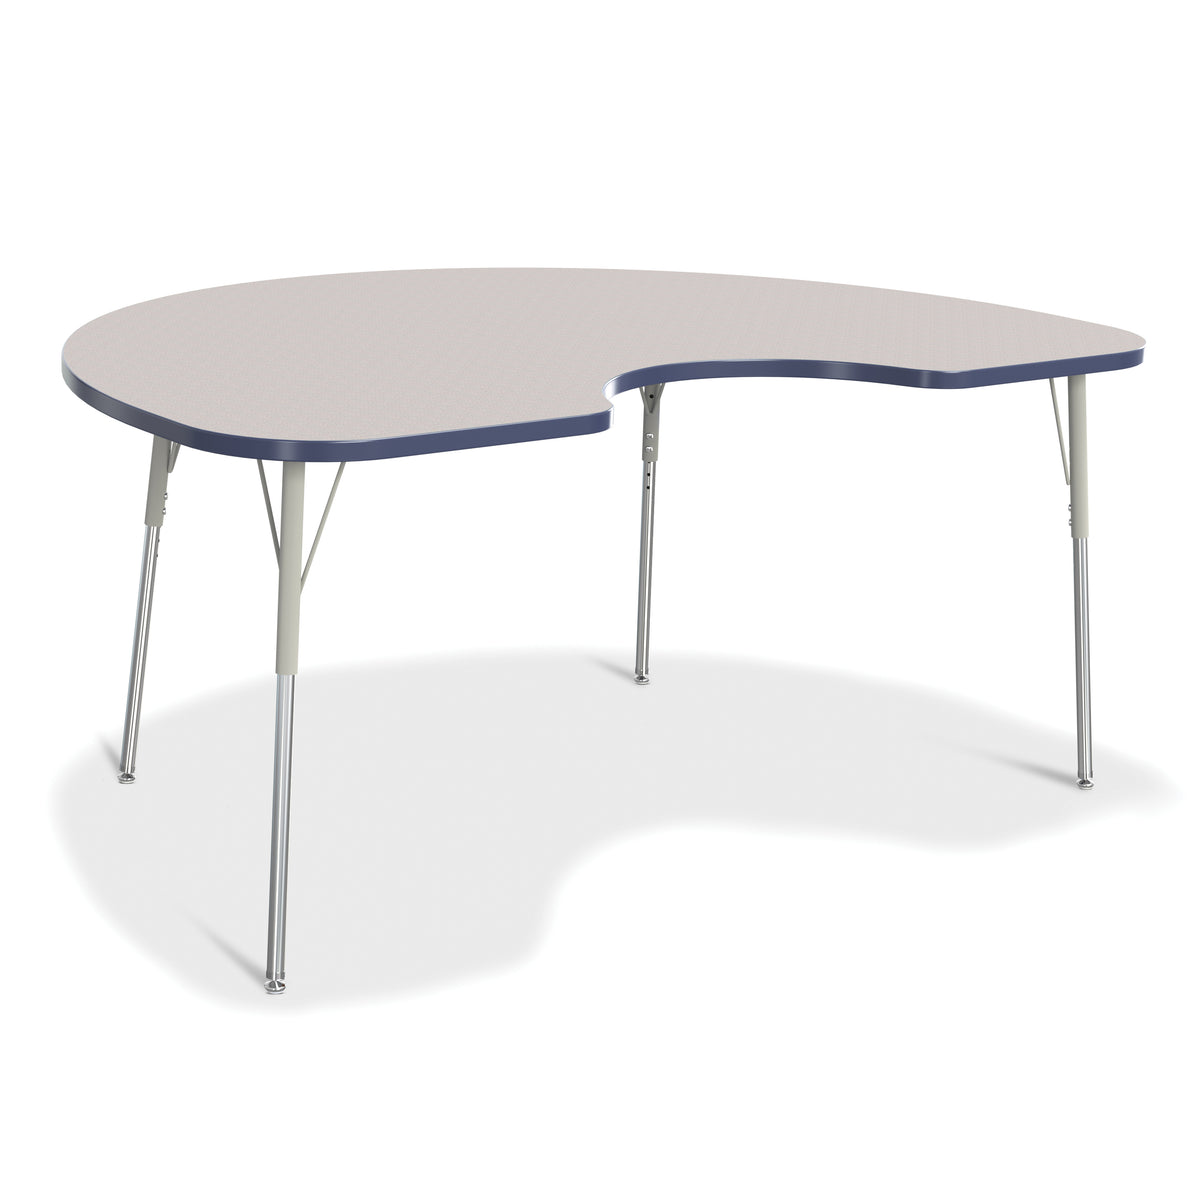 6423JCA112, Berries Kidney Activity Table - 48" X 72", A-height - Freckled Gray/Navy/Gray